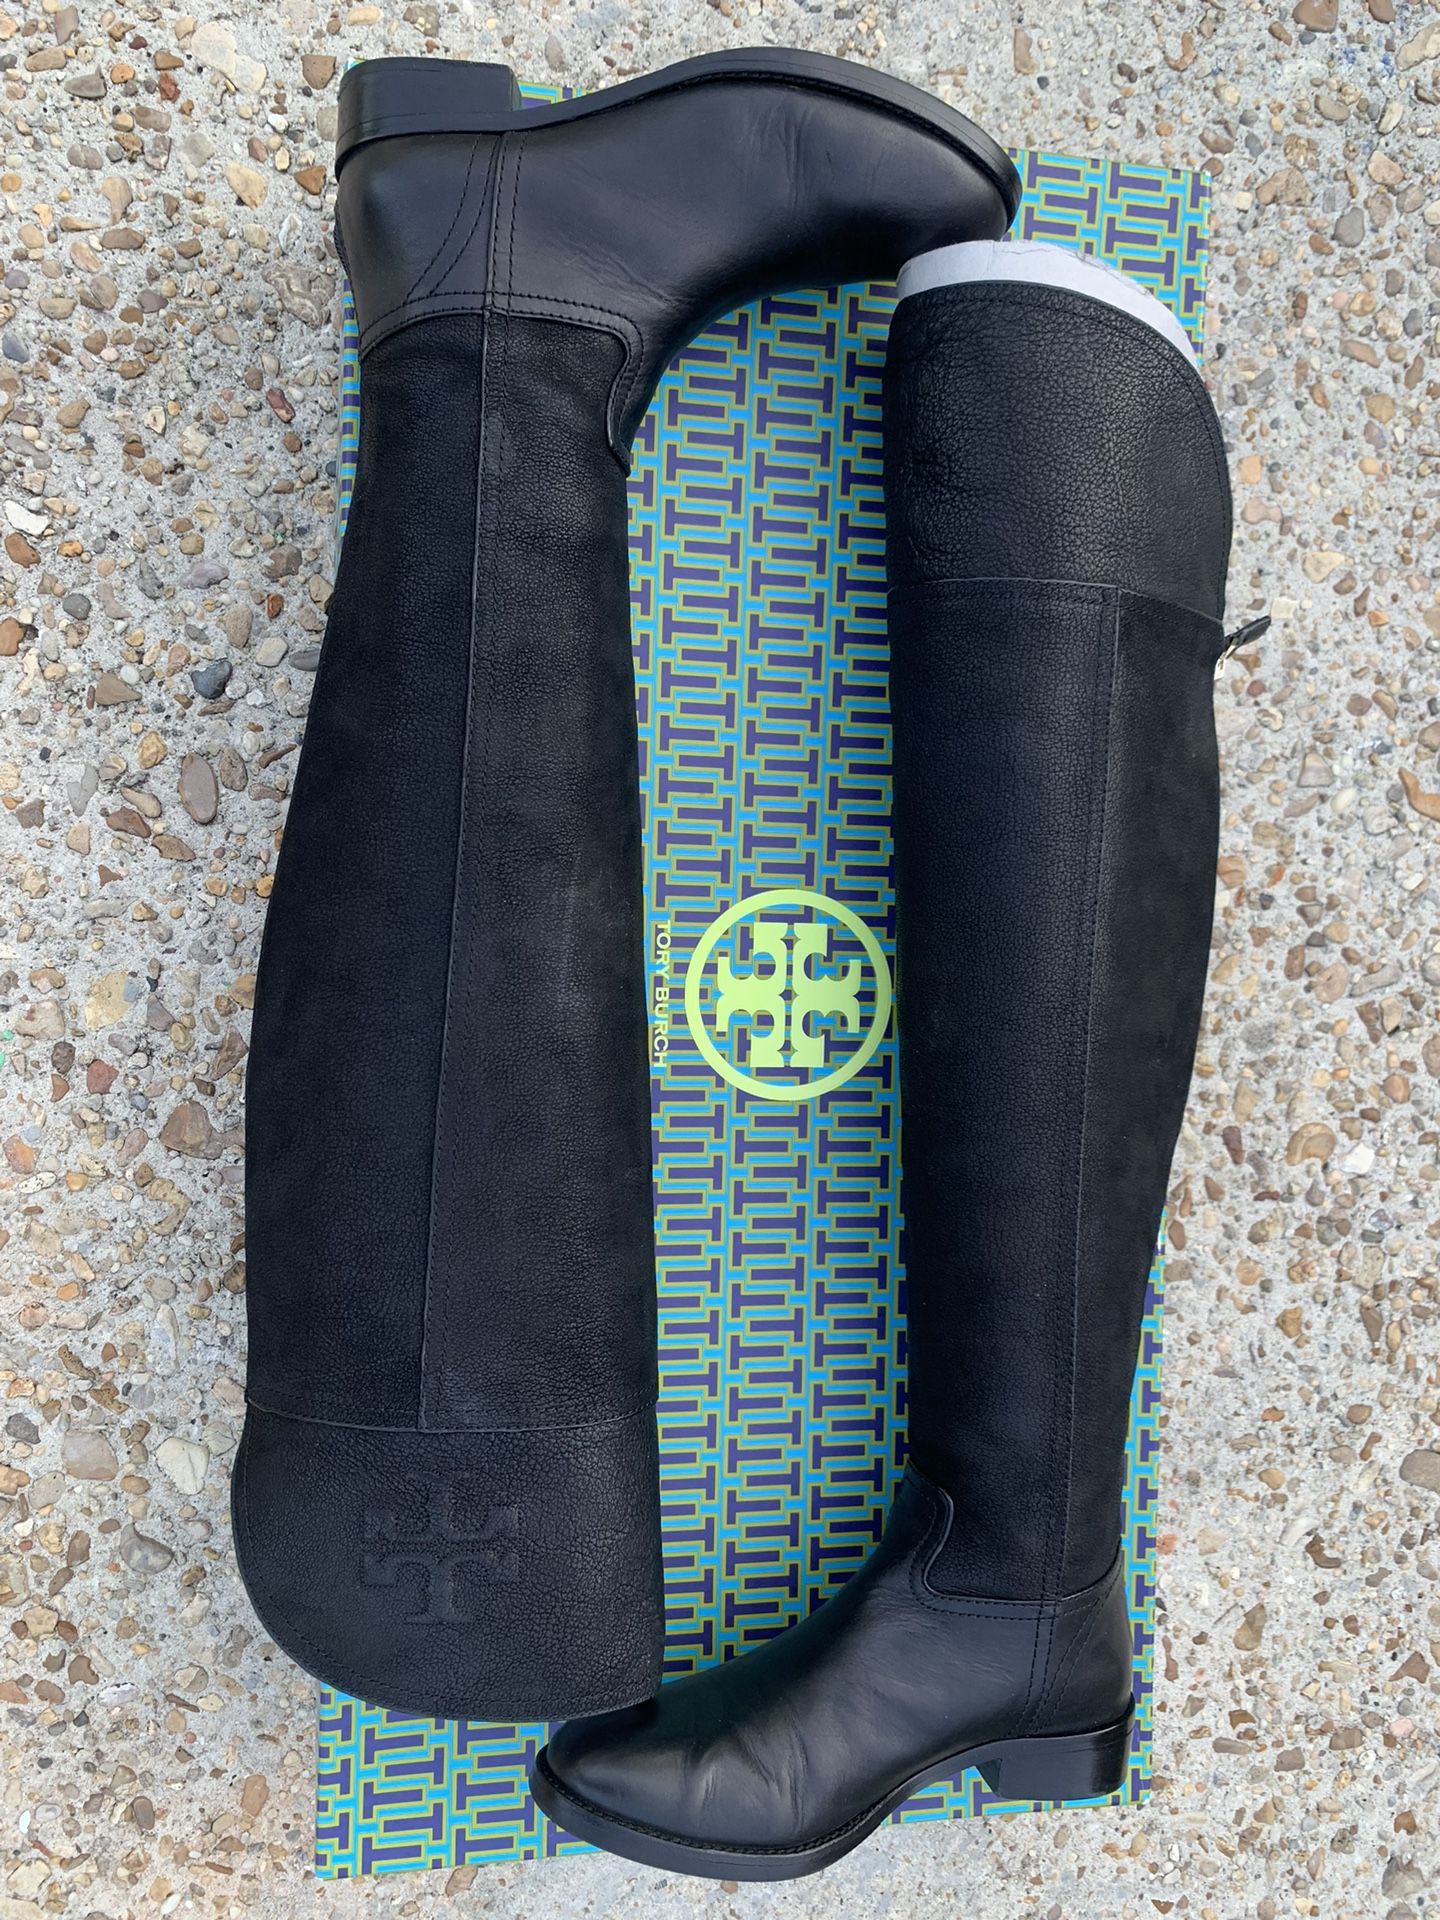 Tory Burch Simone Over the Knee Boots